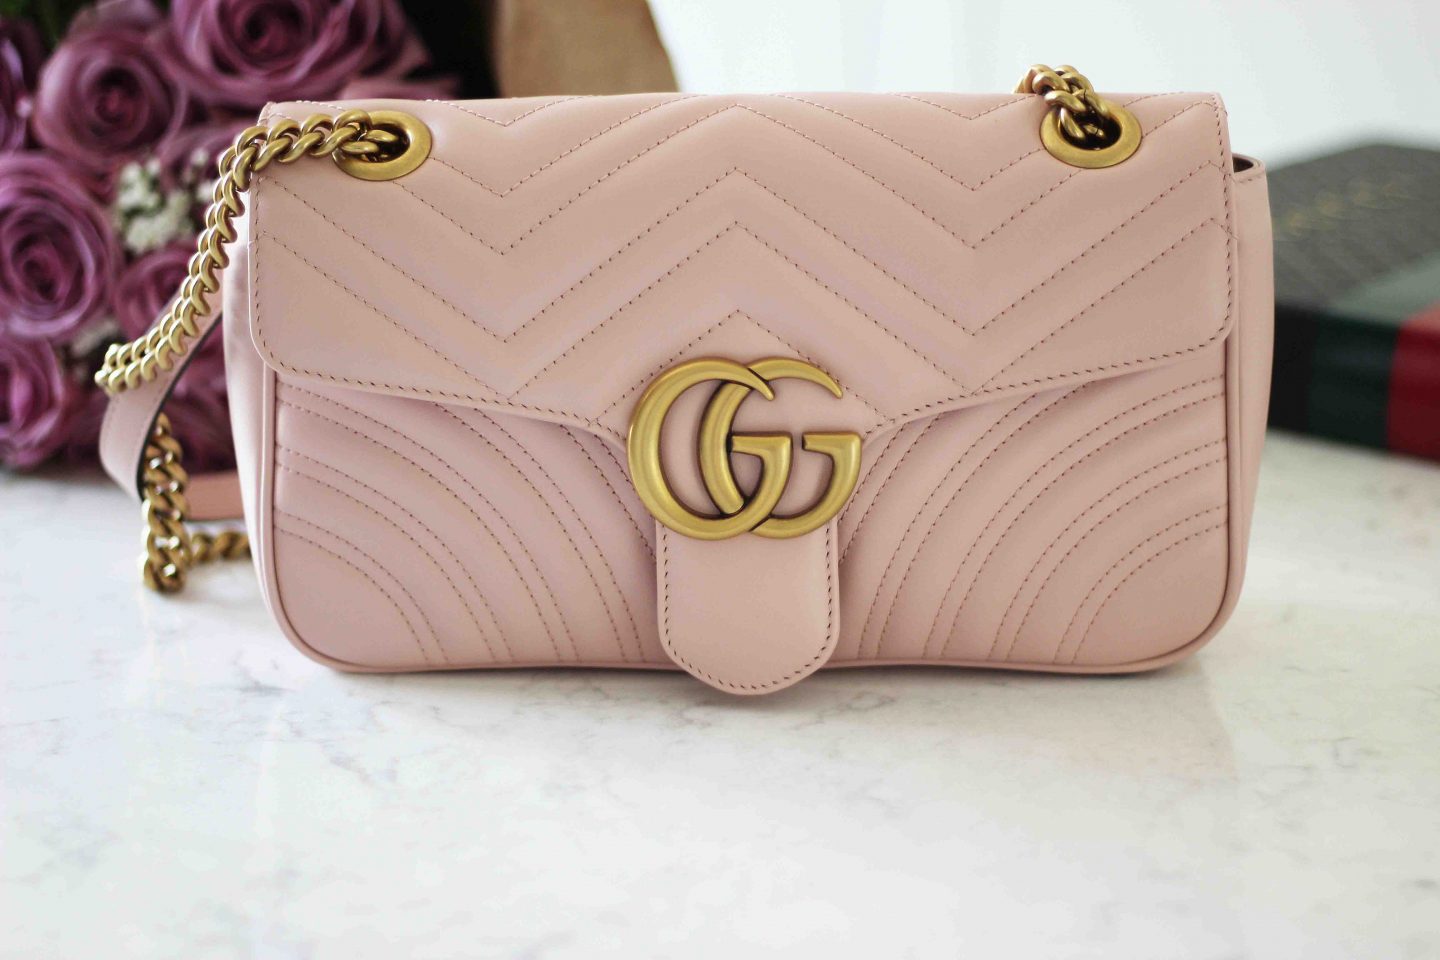 Comparing the Gucci GG Matelassé to the Chanel Classic Flap Bag ...